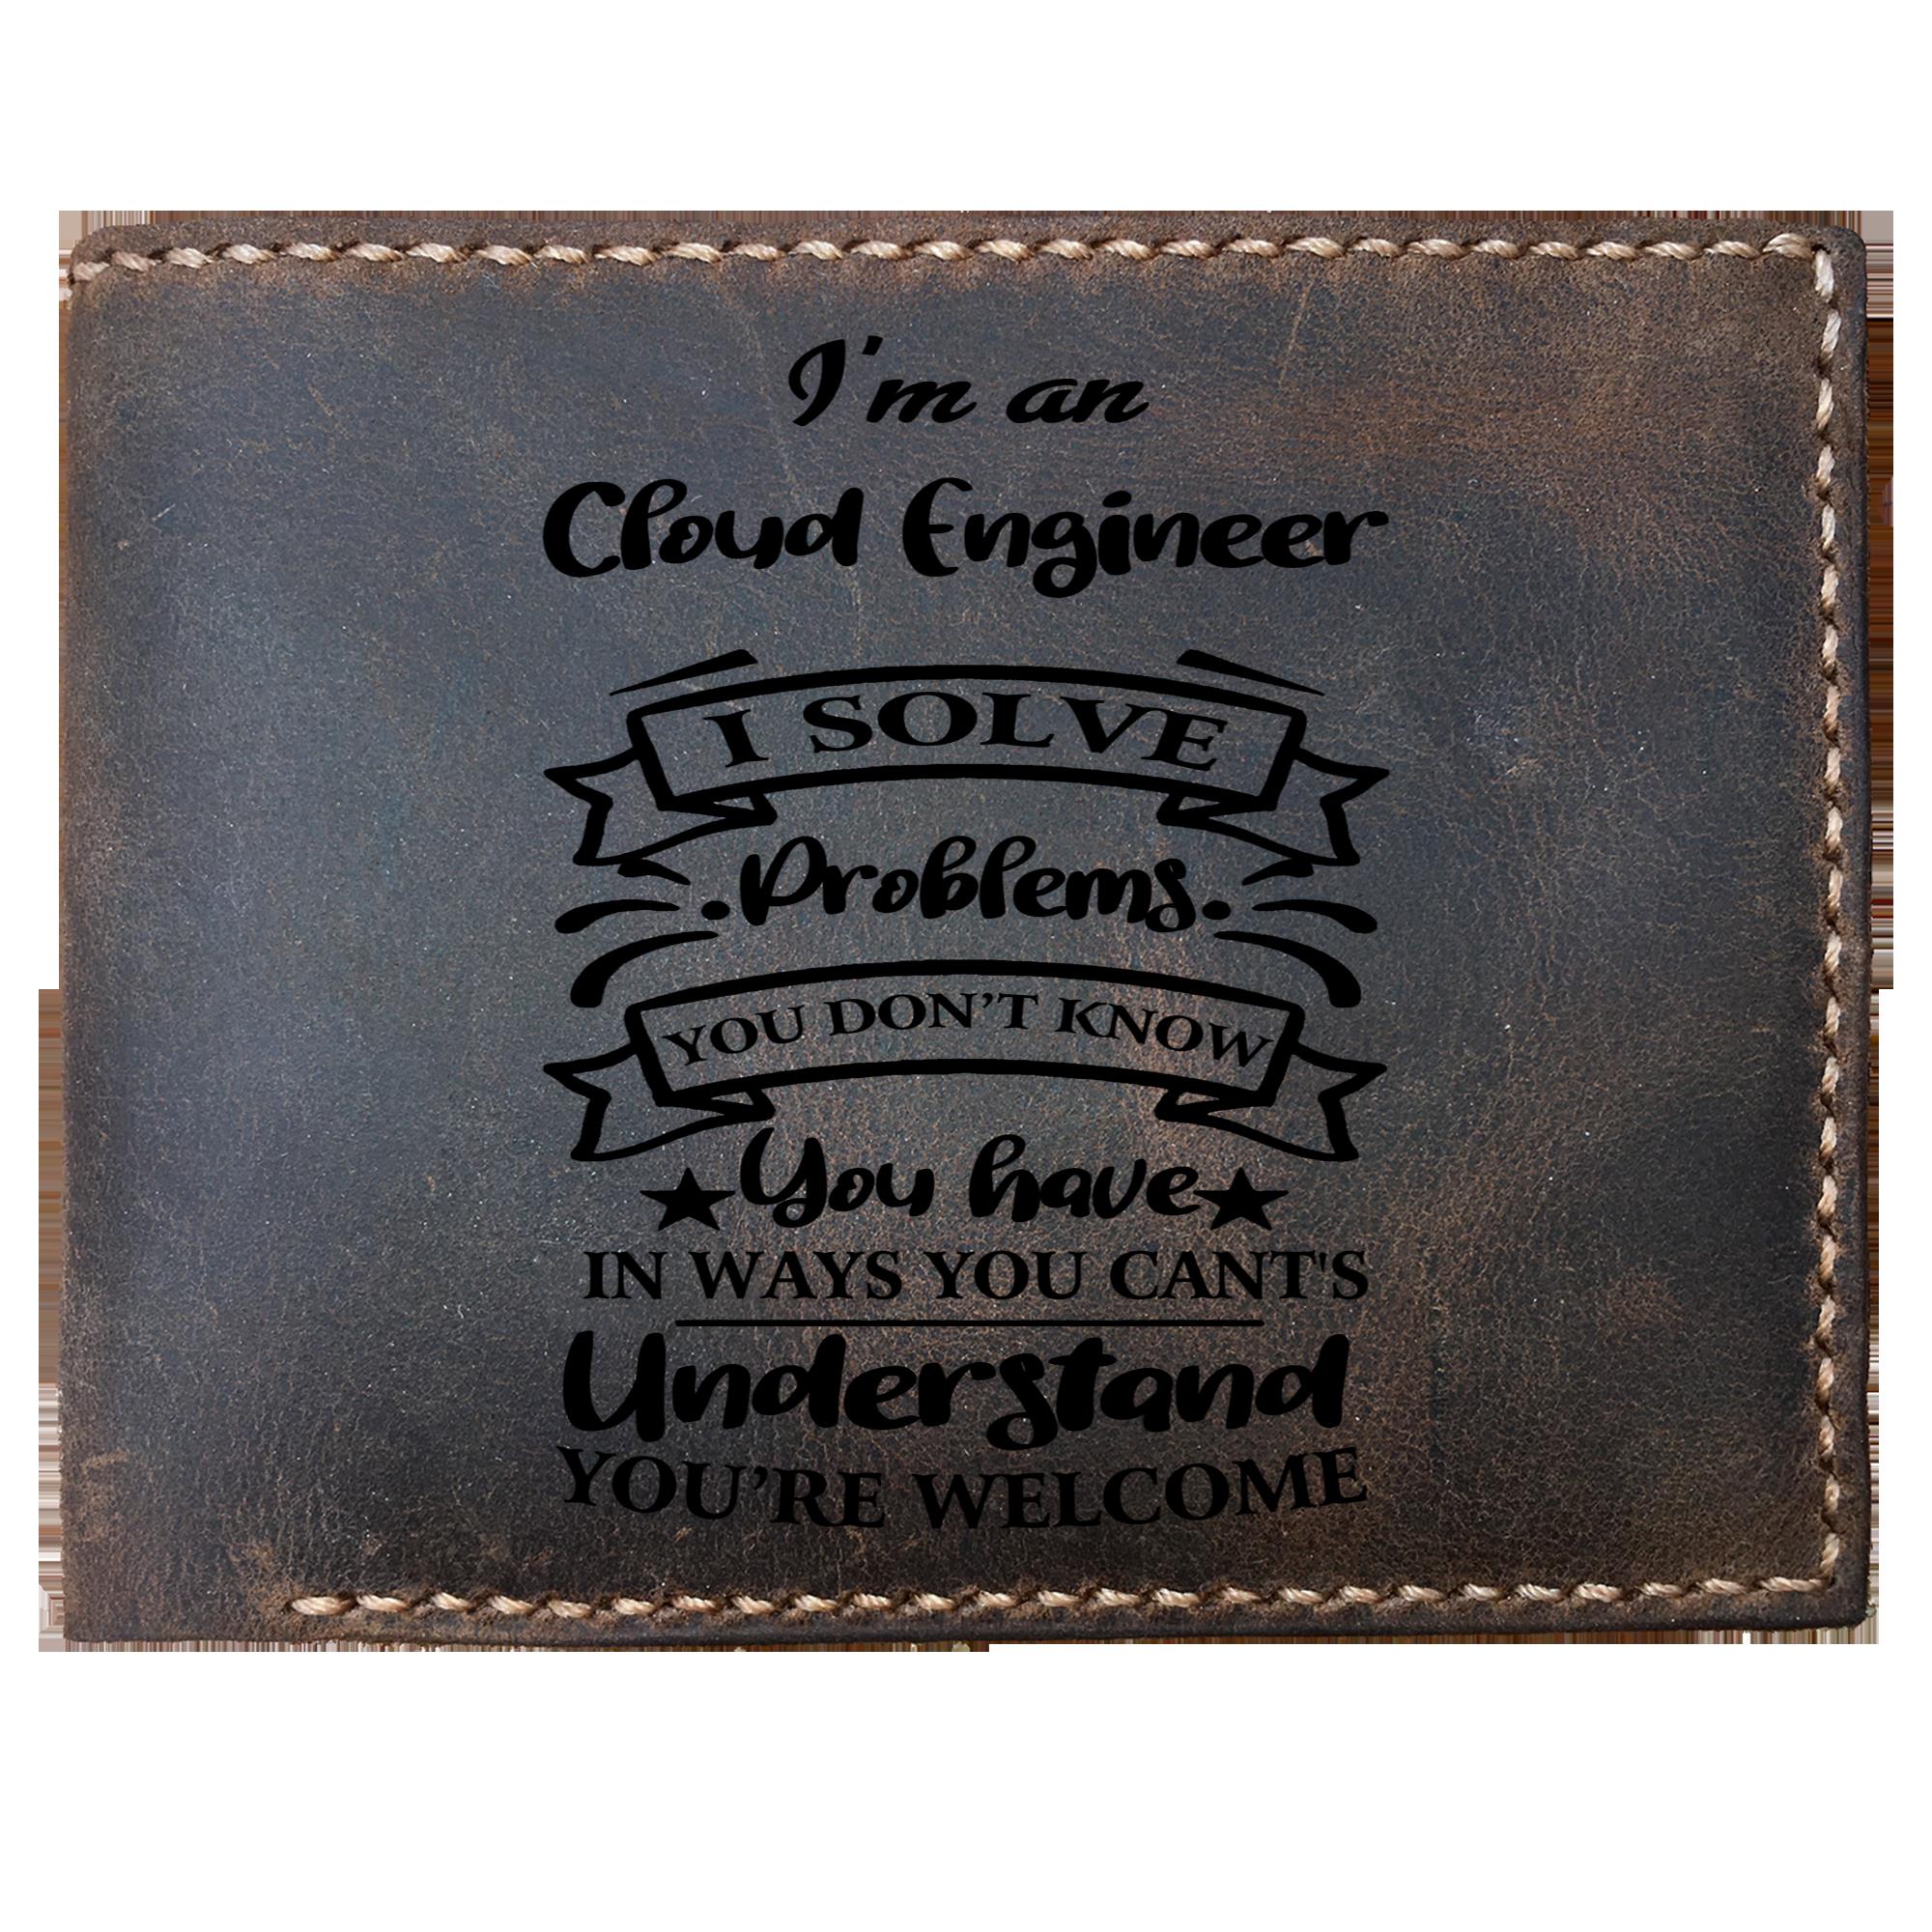 Skitongifts Funny Custom Laser Engraved Bifold Leather Wallet For Men, I'm an Cloud Engineer Solve Problems, Father's Day Gifts